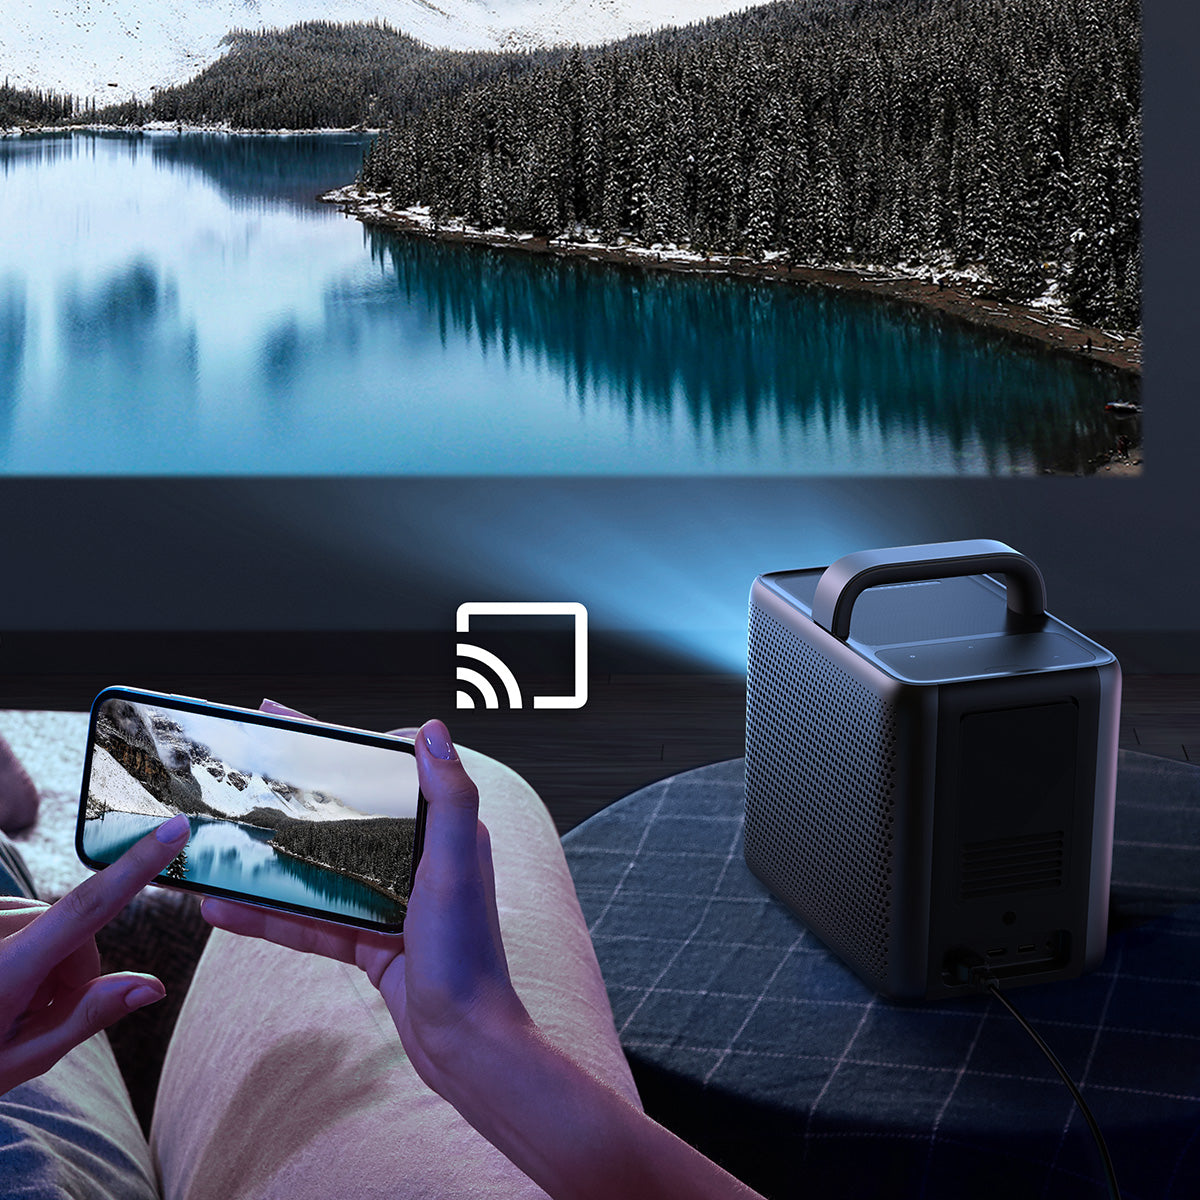 Nebula Cosmos Laser 4K: Portable 4K DLP projector launches at a discount  after CES 2022 announcement -  News